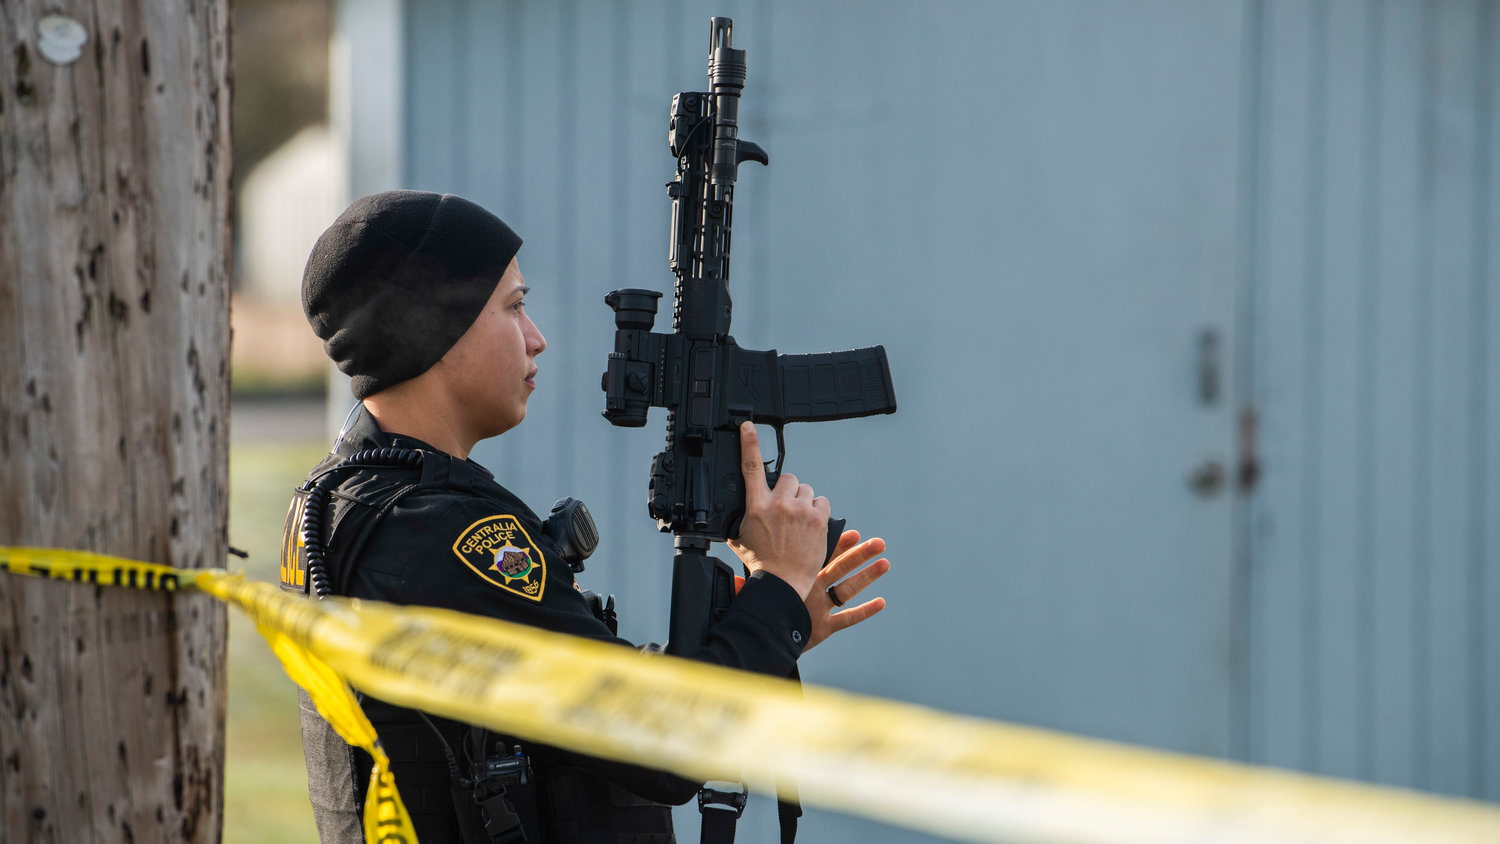 A Centralia police officer arrives on scene indexing a rifle in  the 1300 block of Windsor Avenue in Centralia on Thursday.